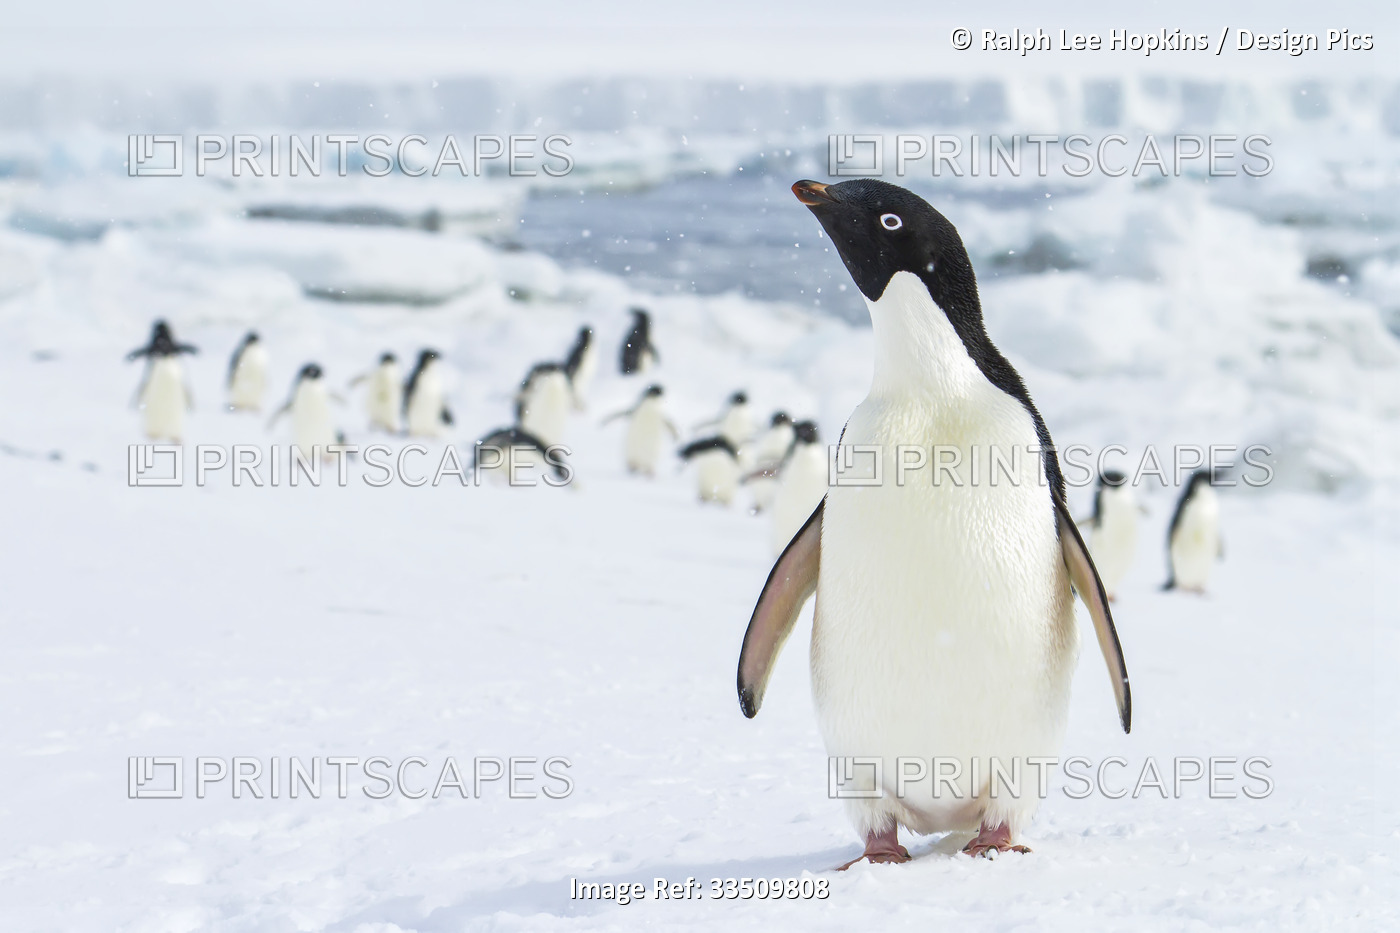 Portrait of an adelie penguin with it's colony in the background.